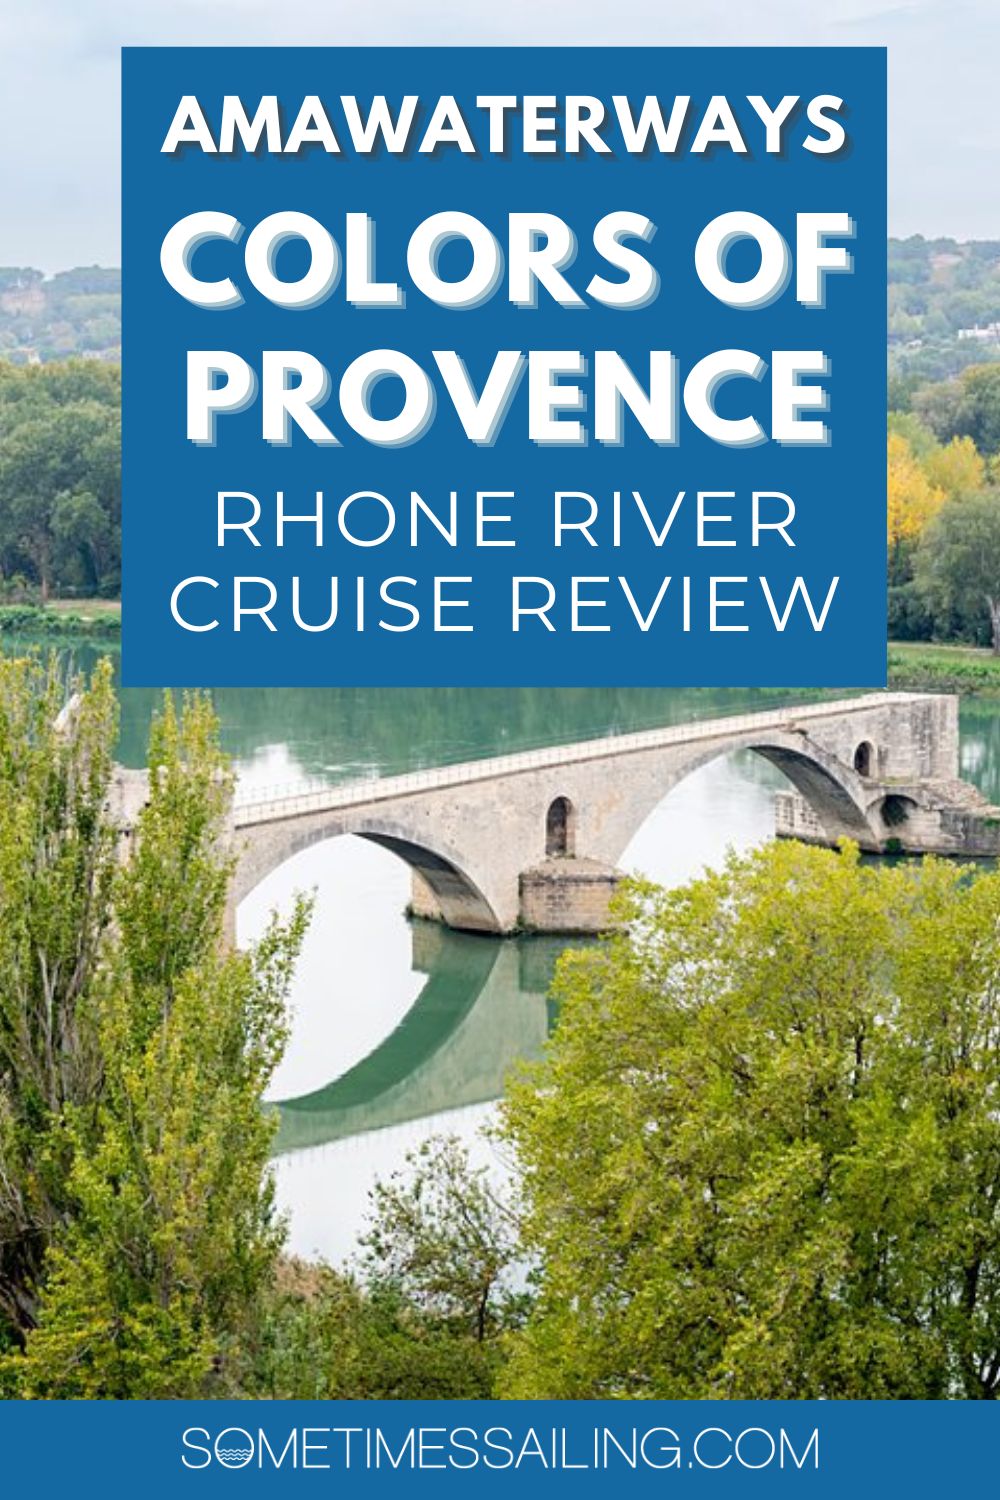 AmaWaterways Colors of Provence Rhone River Cruise Review with an aerial view of a landscape photo looking at a bridge in the river in Avignon.